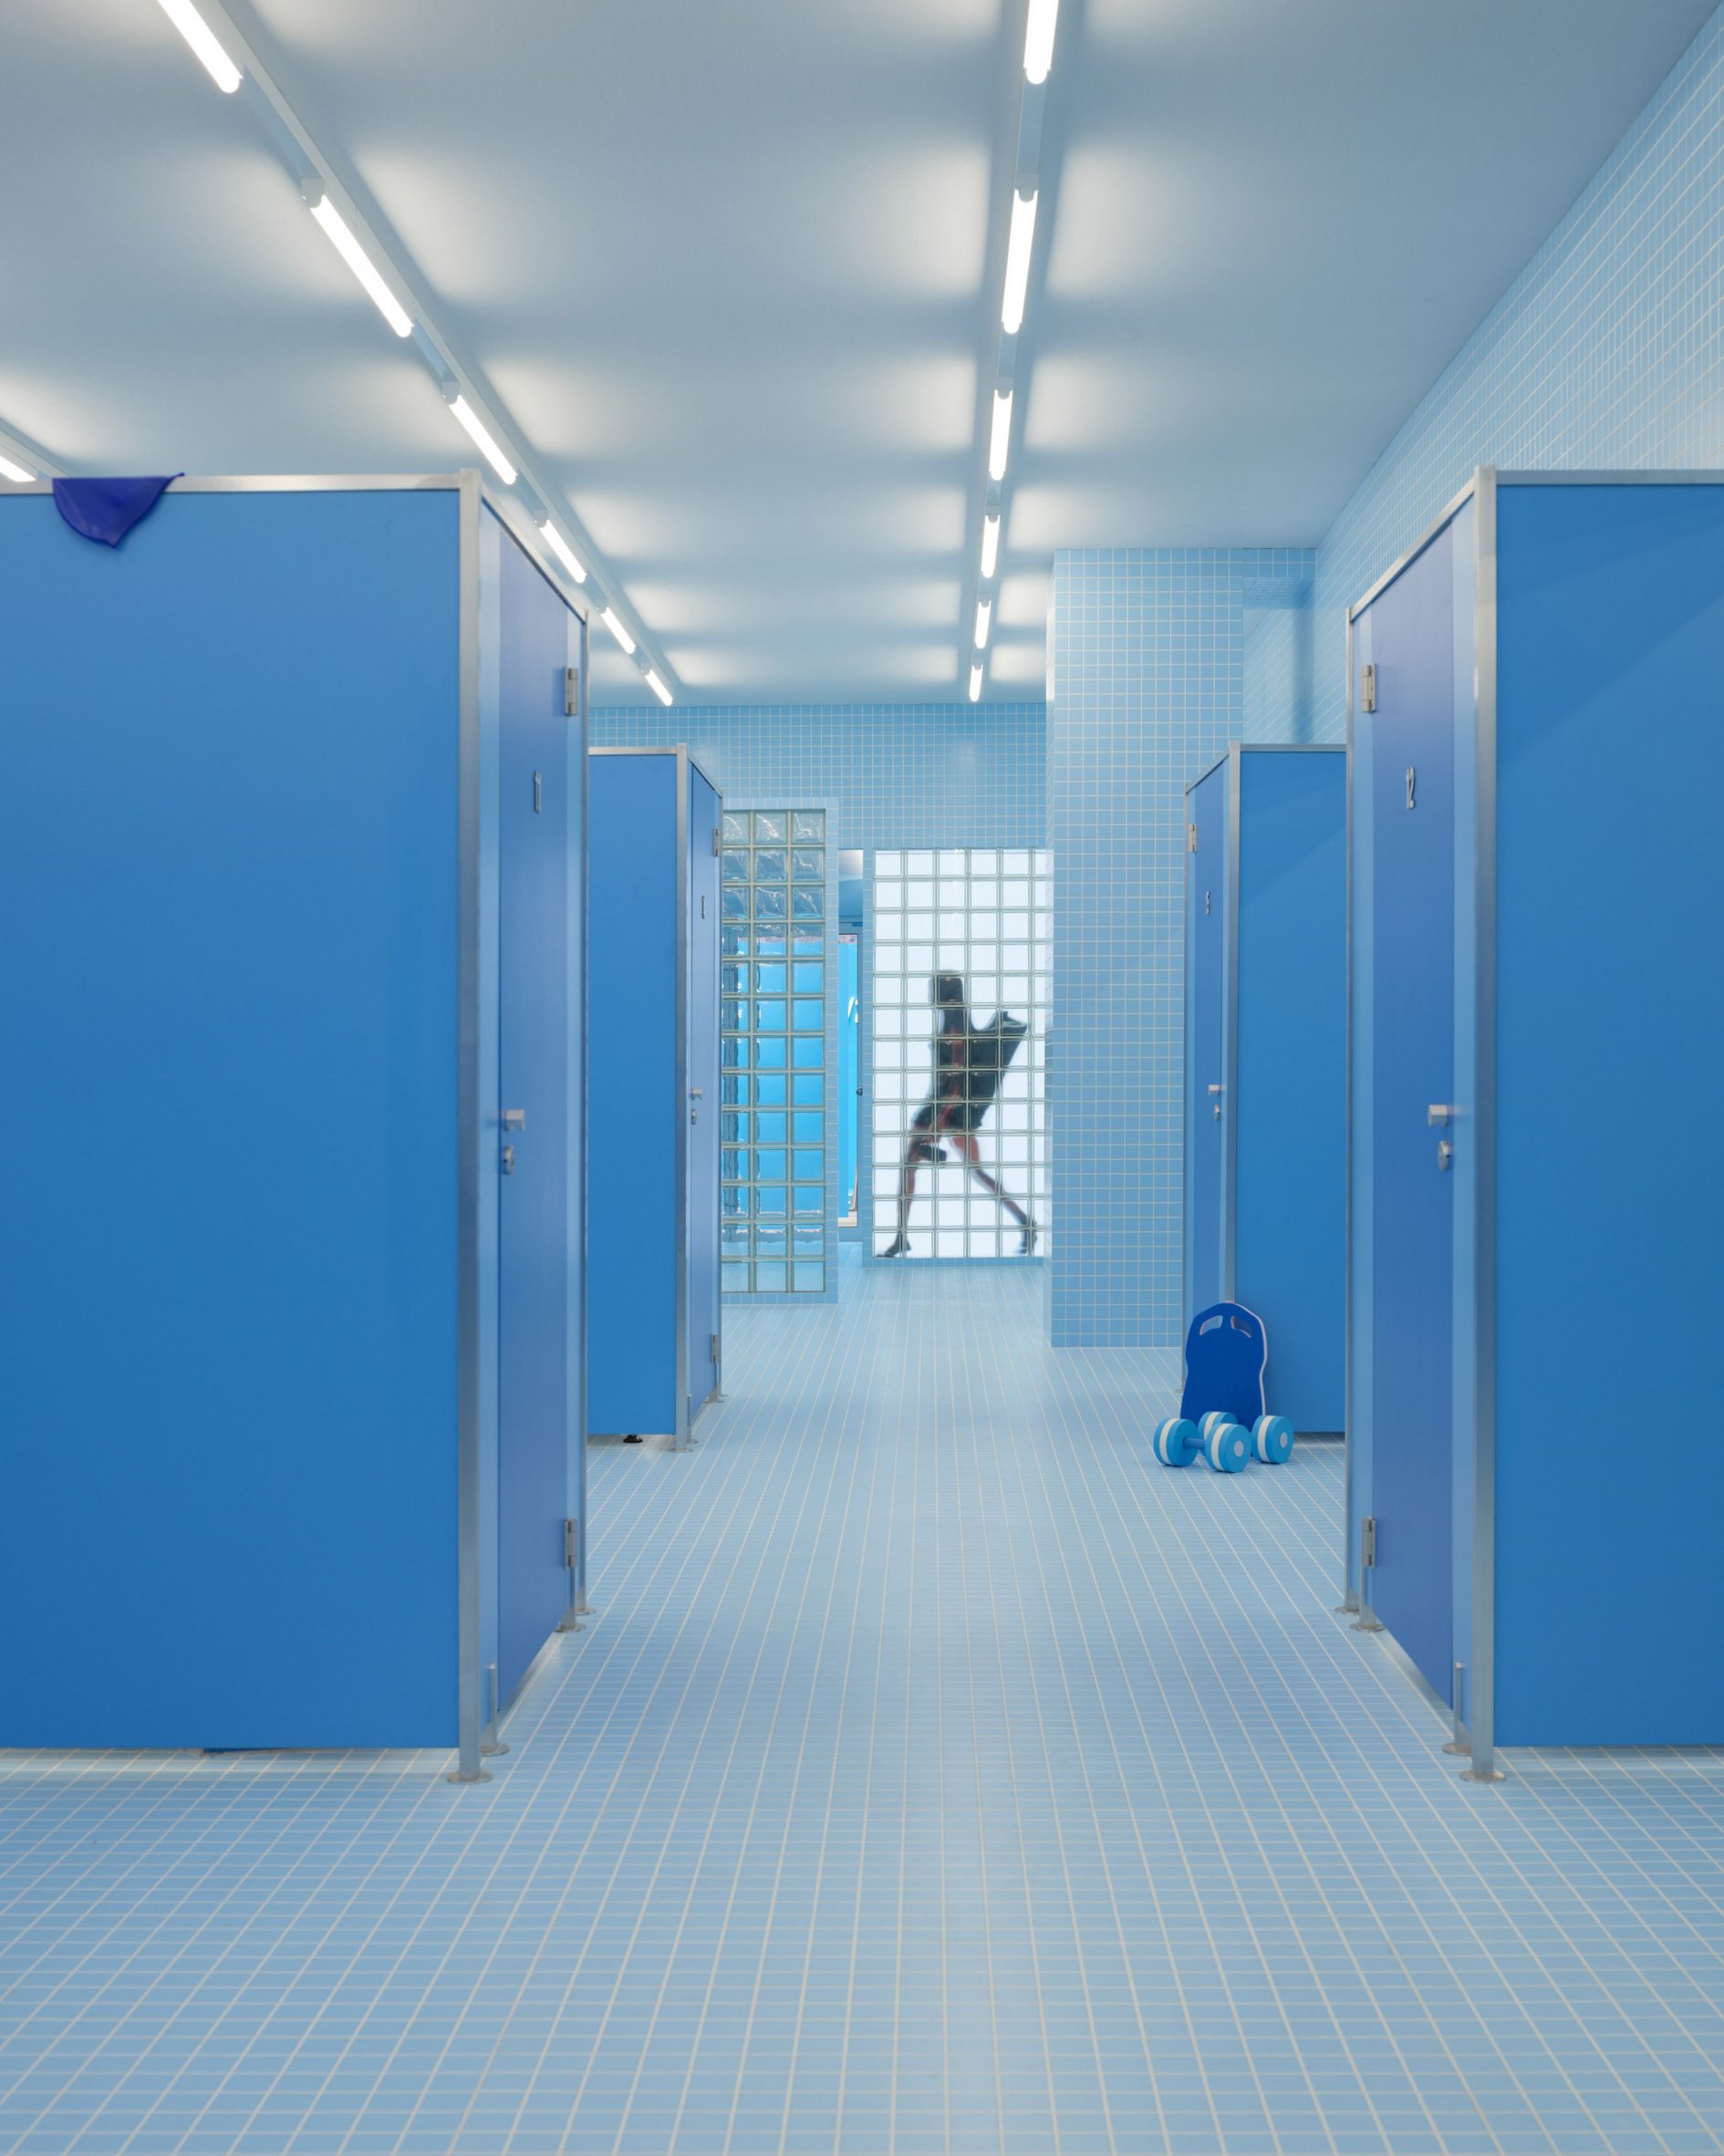 Dark blue changing cubicles fill the mock swimming room changing rooms